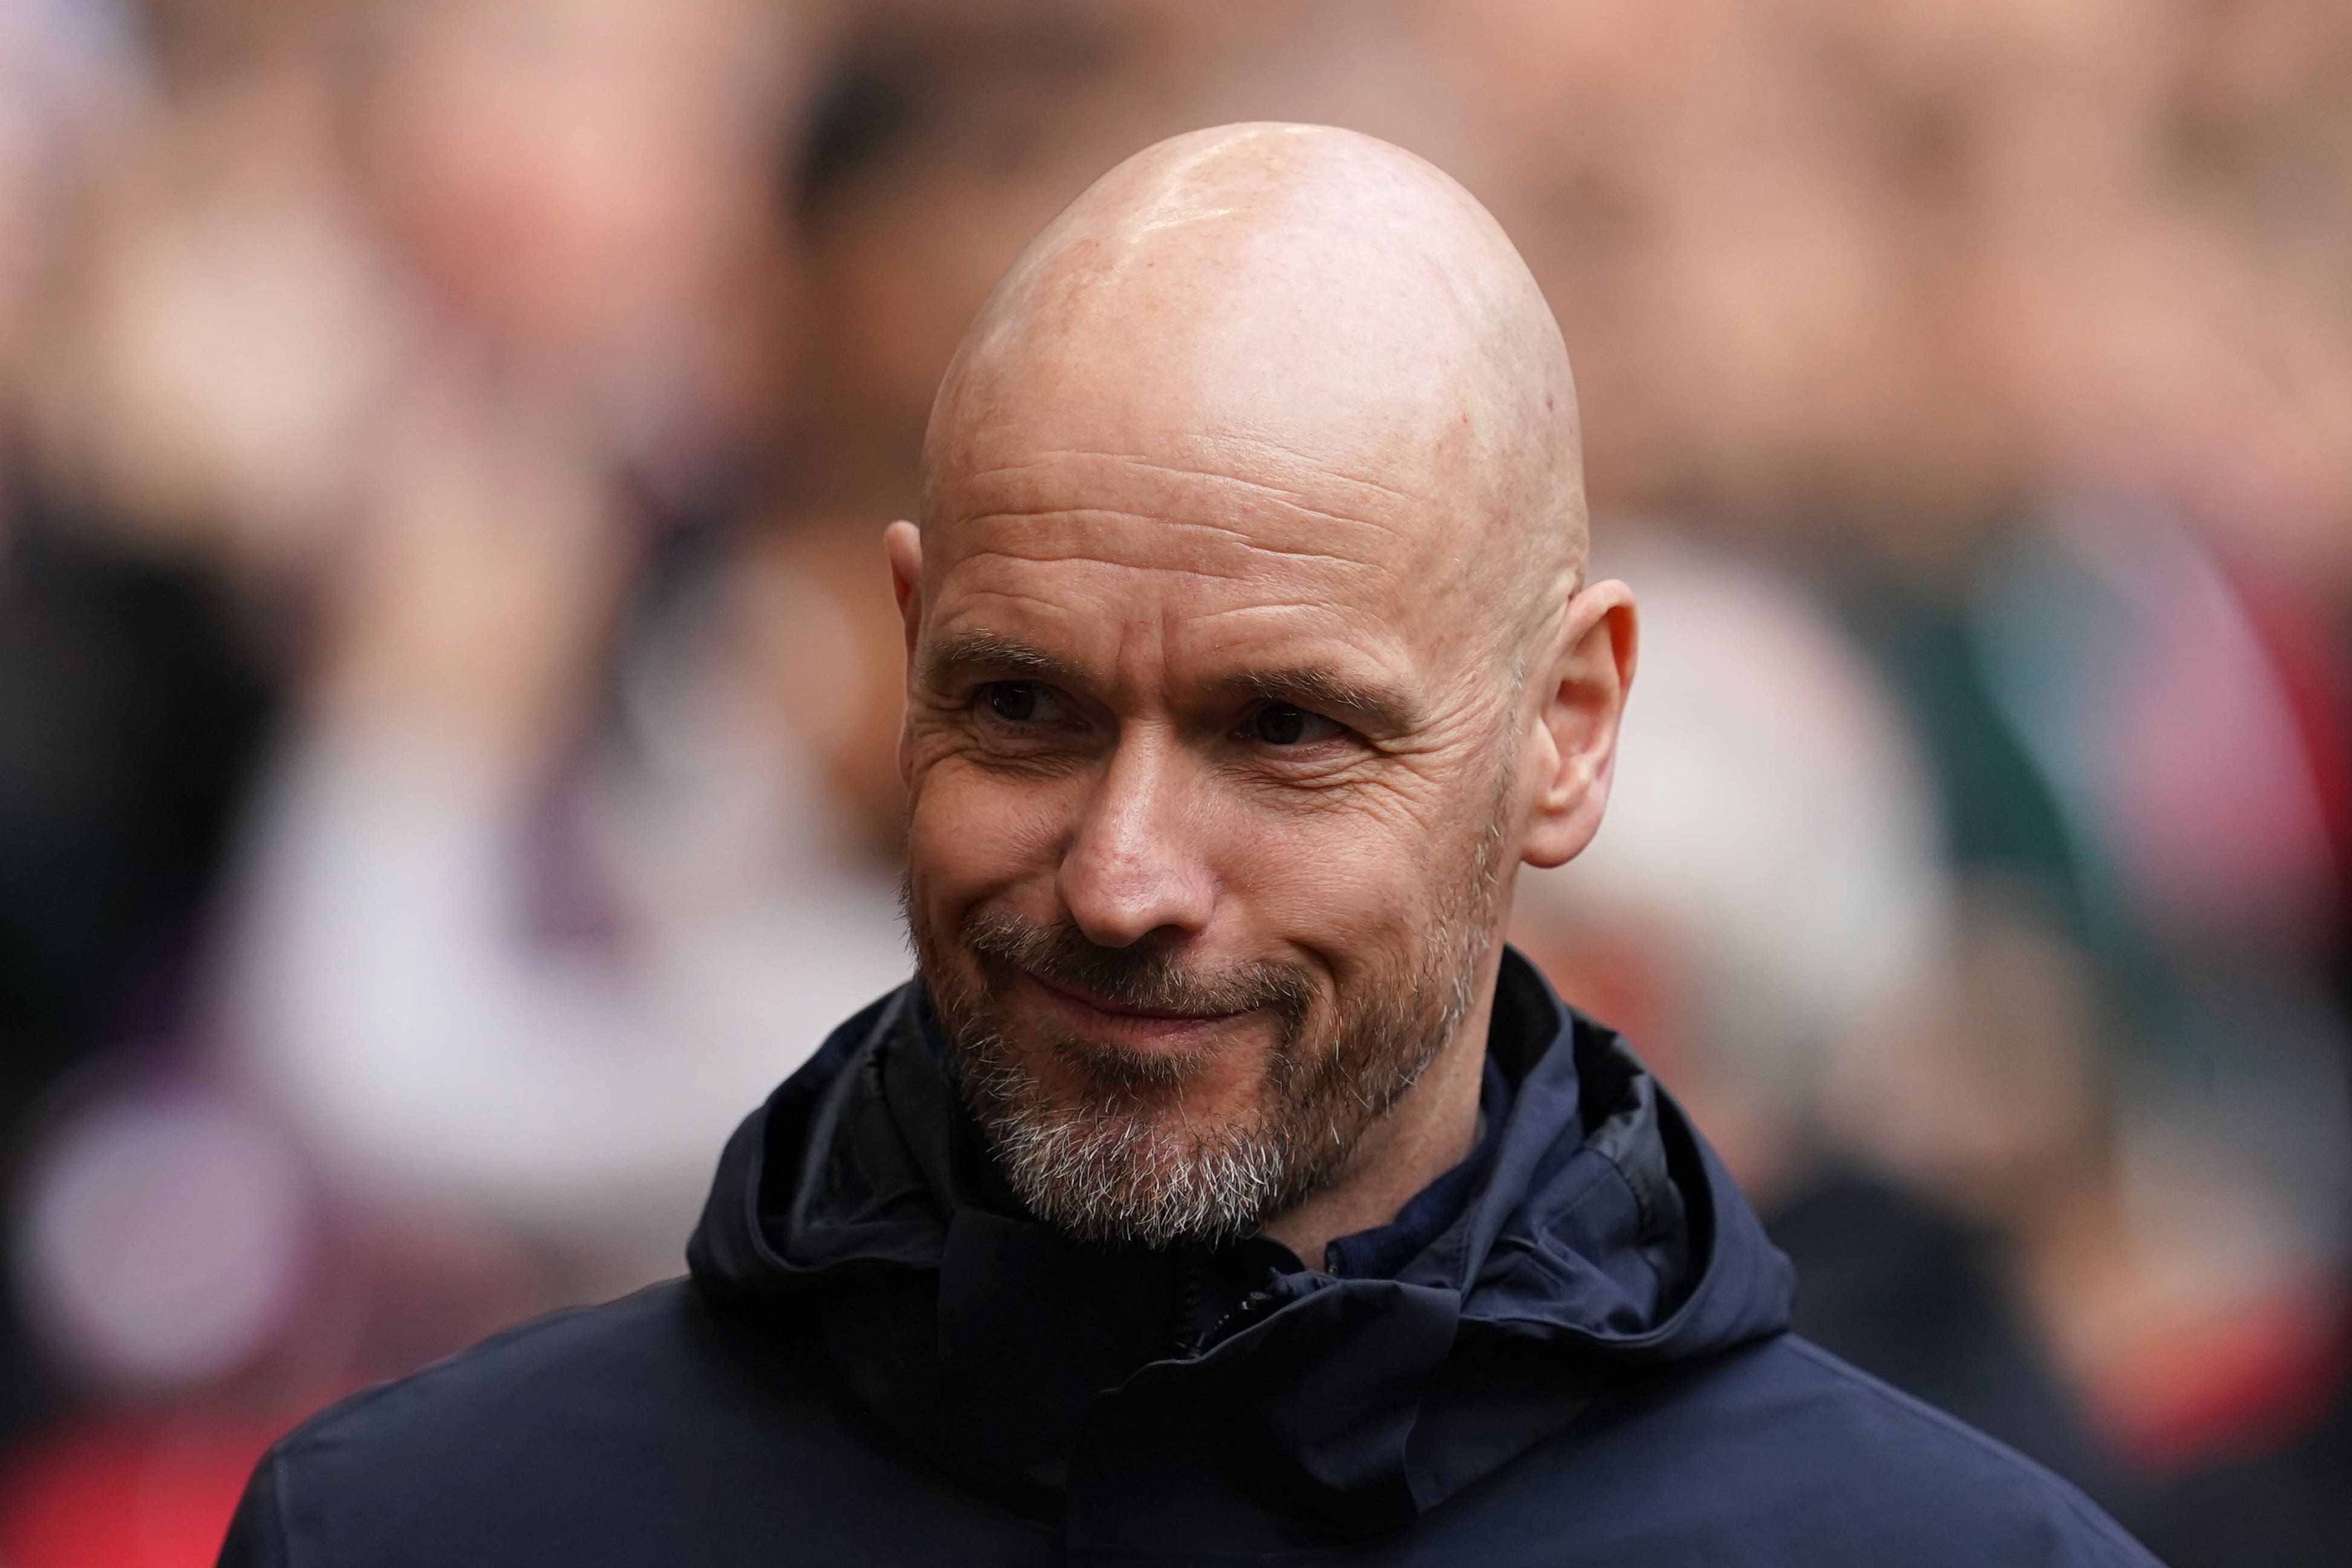  Erik Ten Hag, the new manager of Manchester United, smiles during his first press conference.